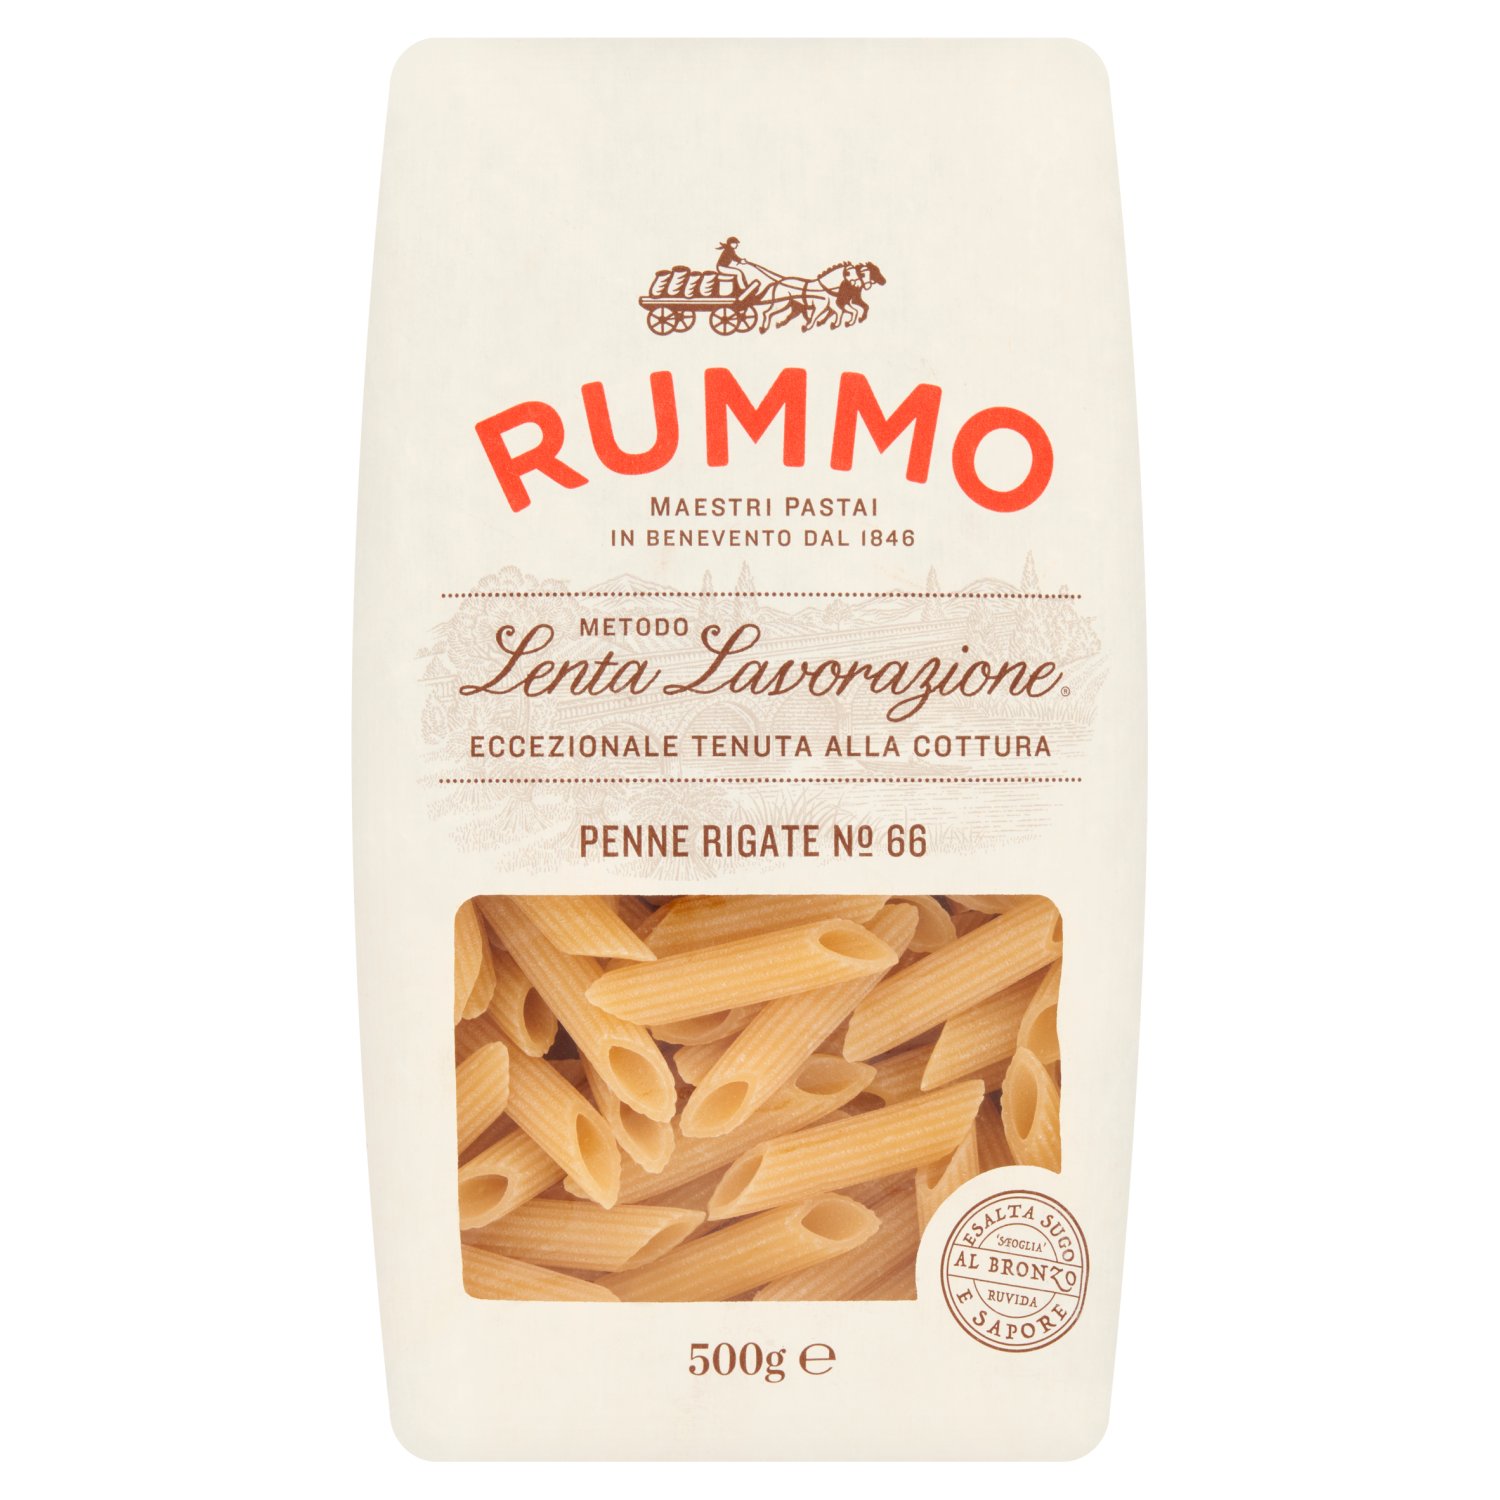 Rummo Penne Rigate No. 66 500g